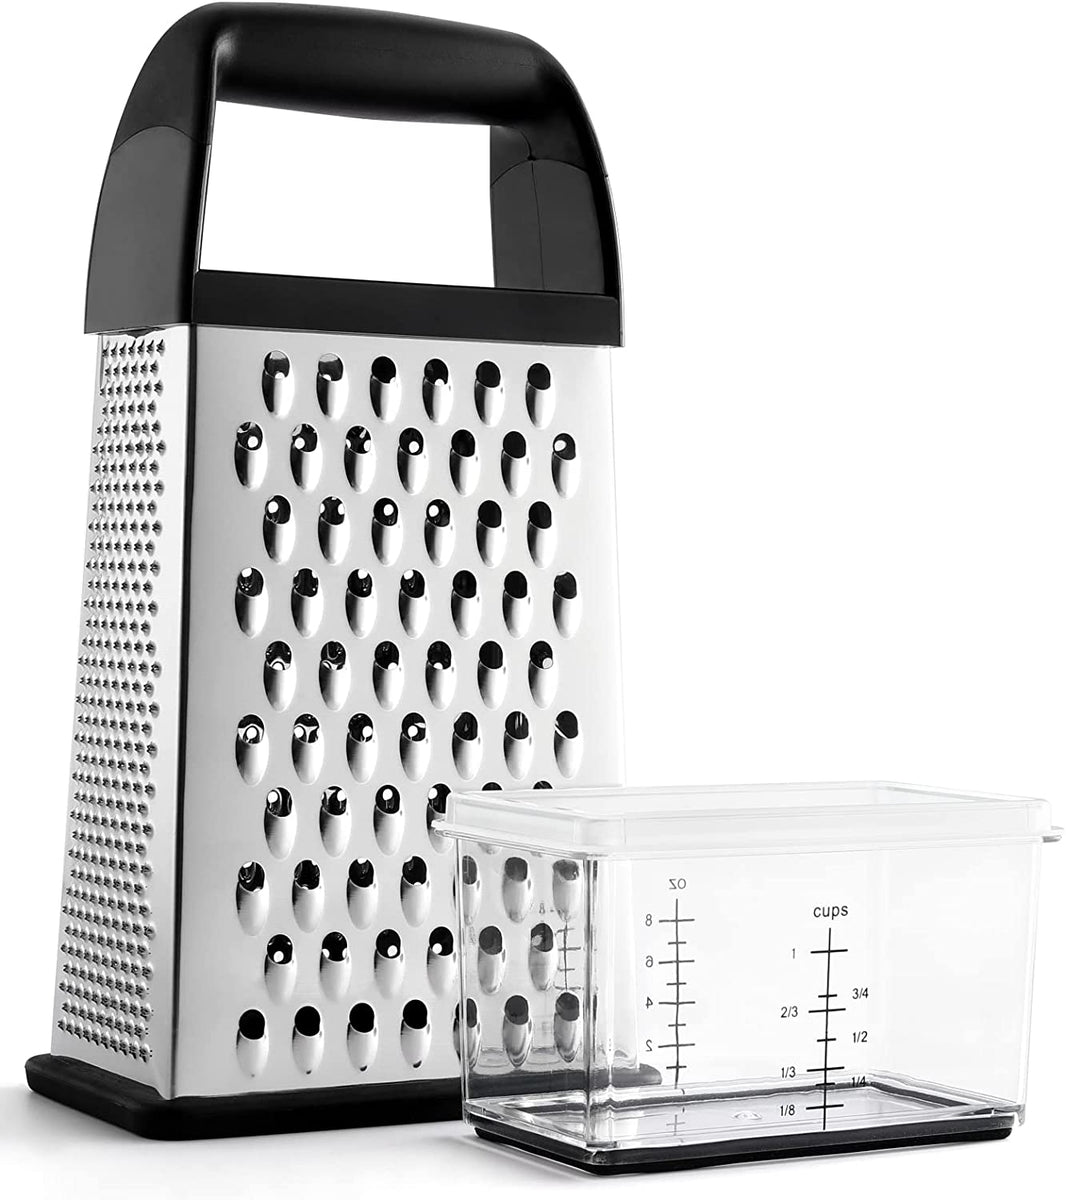 Met Lux Stainless Steel Coarse Grater - with Plastic Handle - 12 inch - 1 Count Box